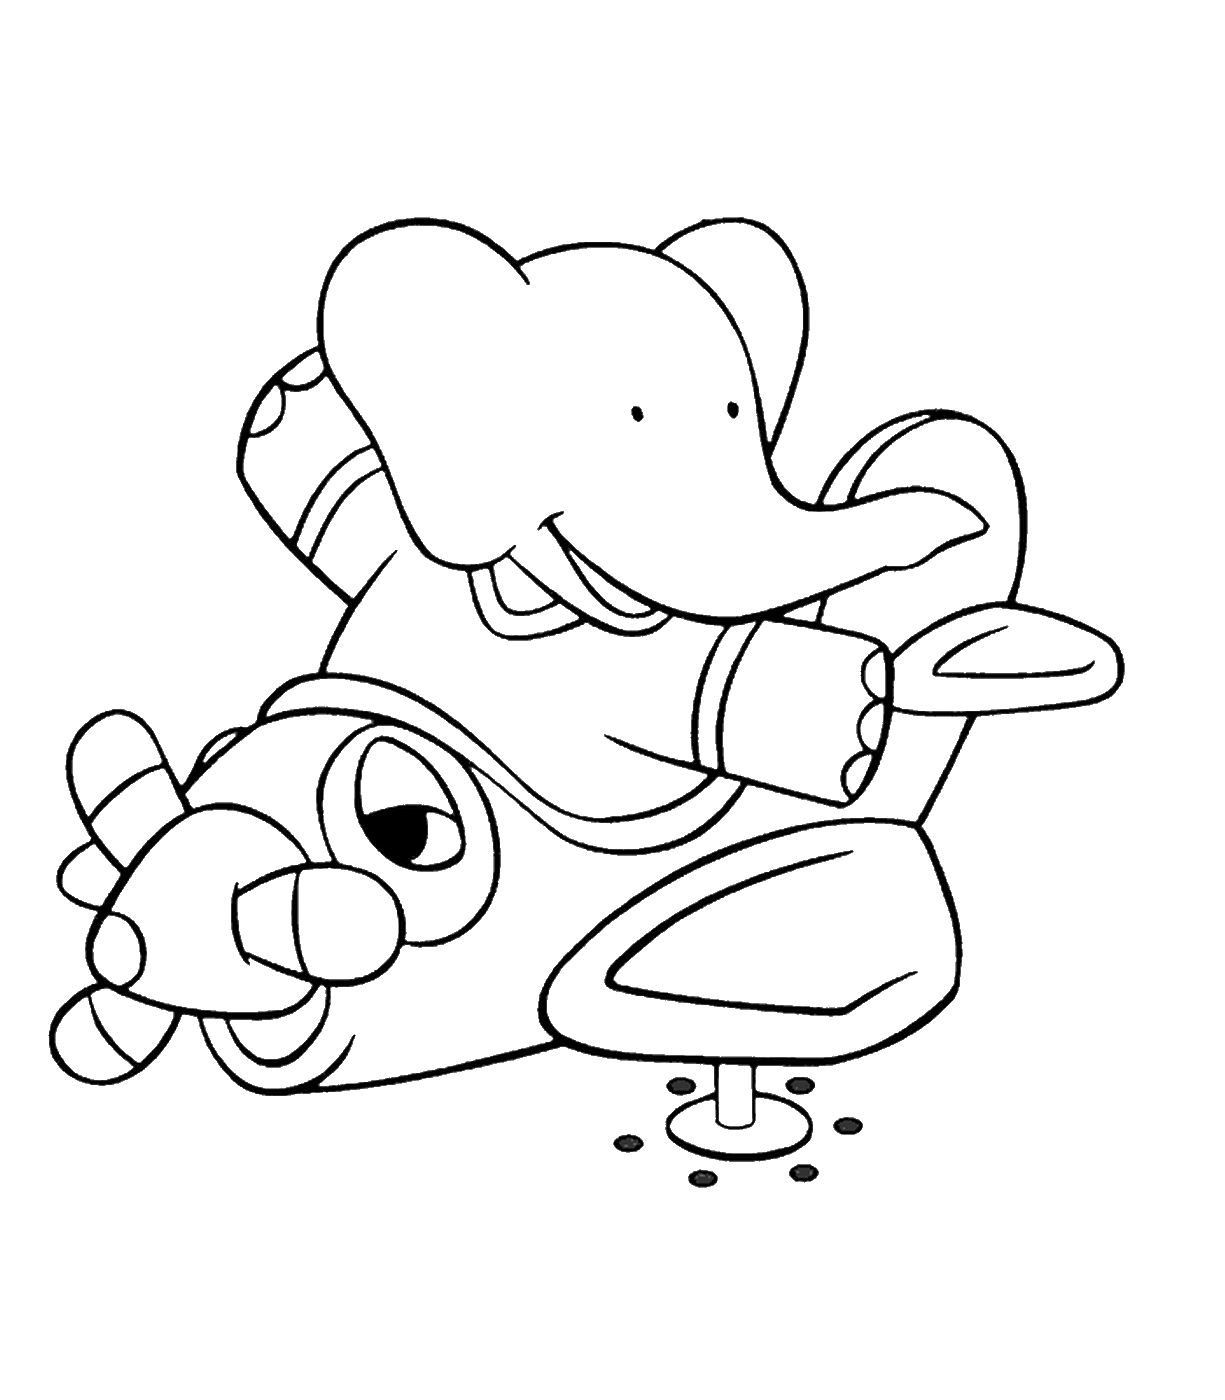 Babar Coloring Pages TV Film babar_cl_06 Printable 2020 00364 Coloring4free